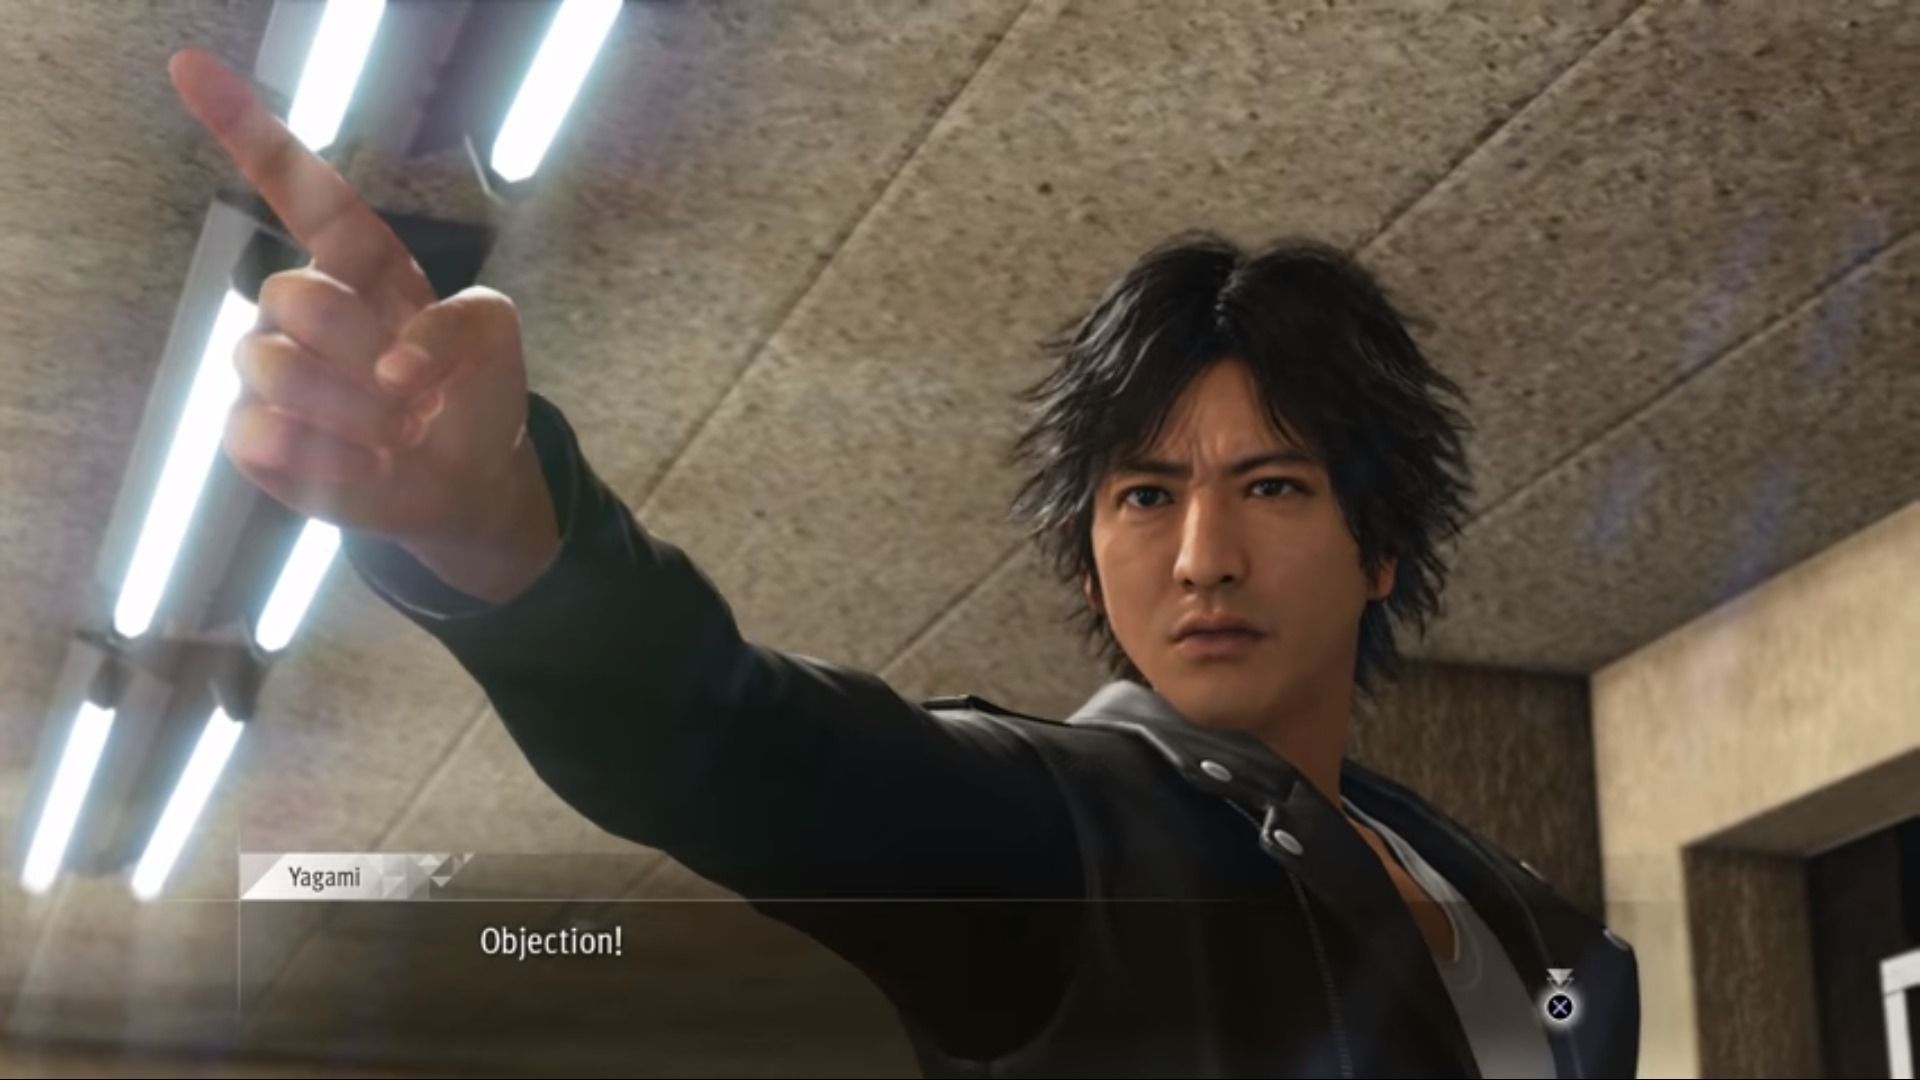 Judgment Looks At The Tools Takayuki Yagami Can Use To Solve Cases